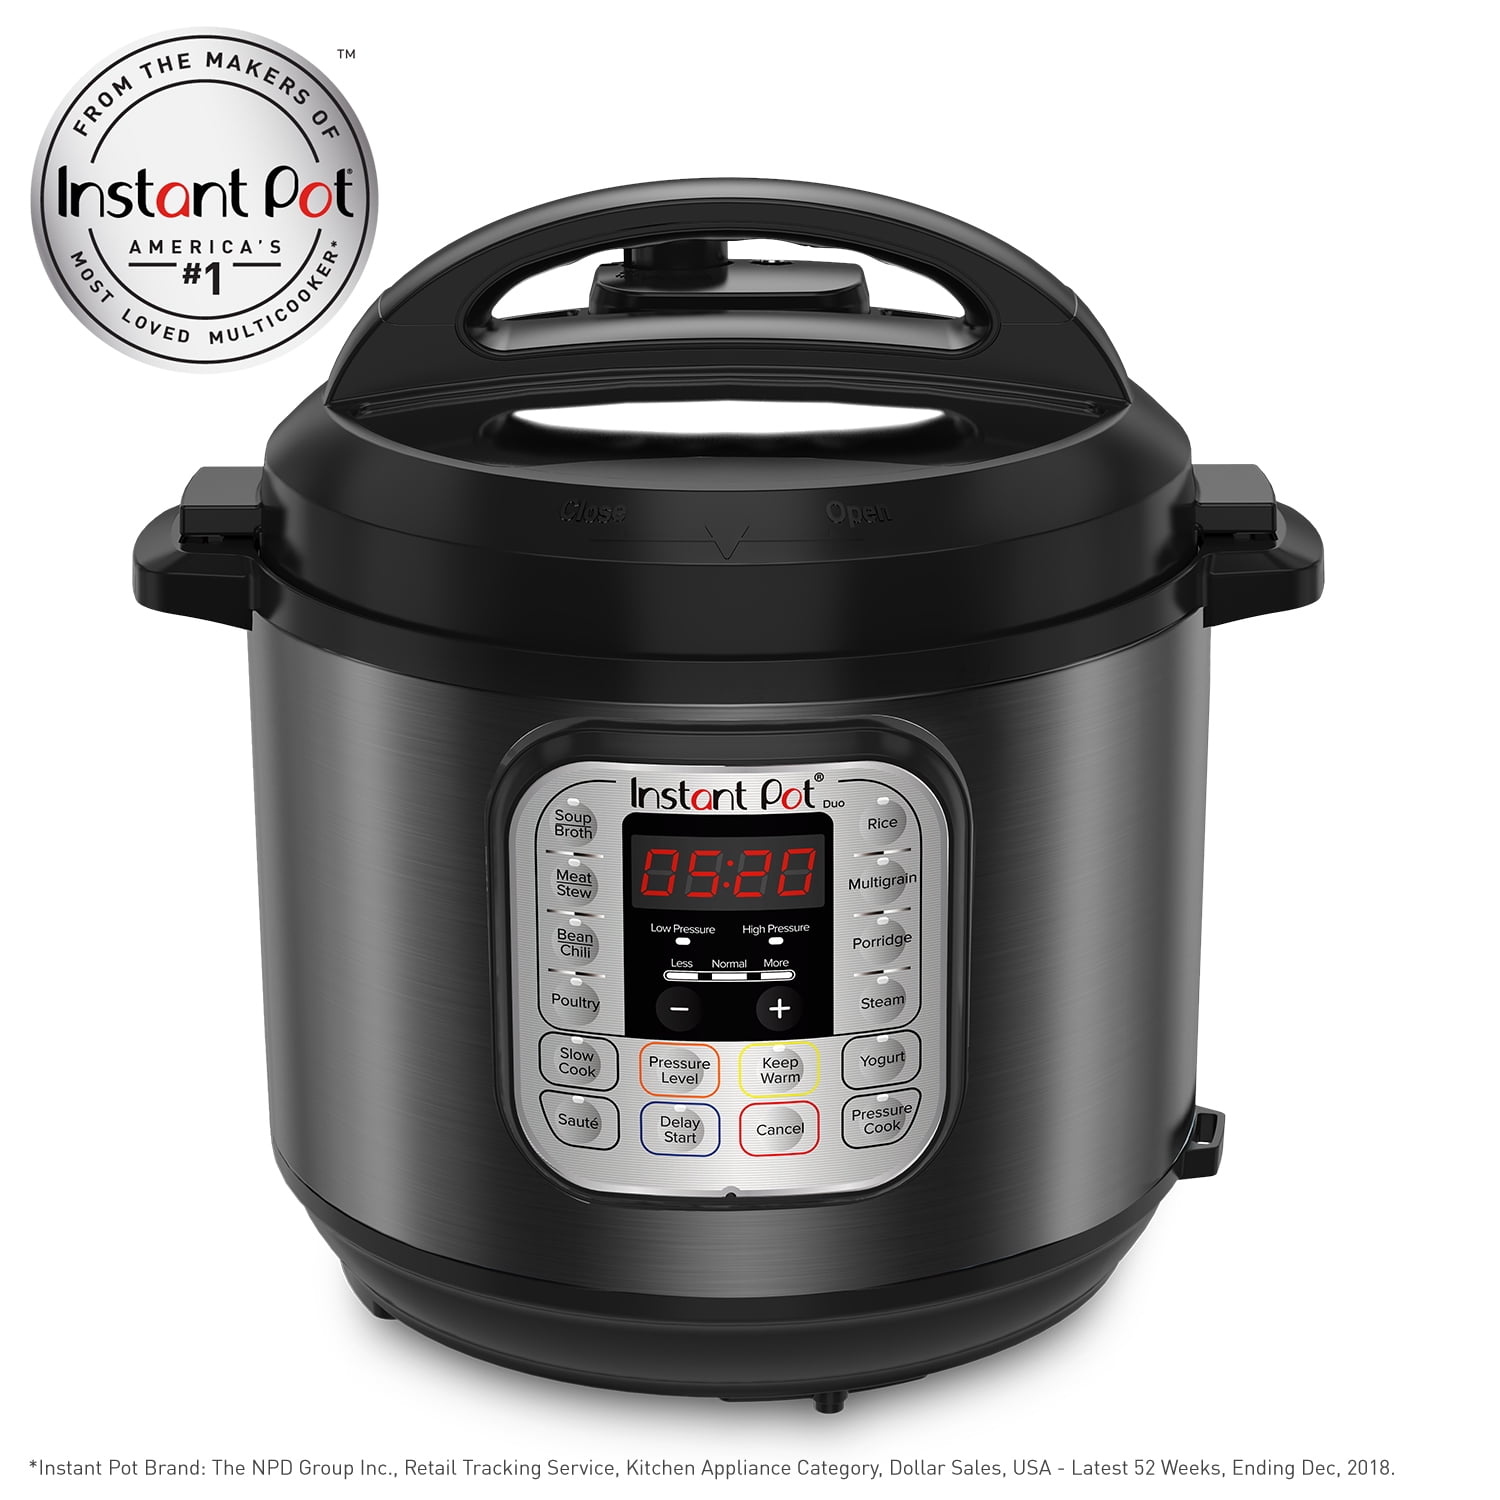 Instant Pot DUO60 Black Stainless 6-Quart 7-in-1 Multi-Use Programmable  Pressure Cooker, Slow Cooker, Rice Cooker, Sauté, Steamer, Yogurt Maker and